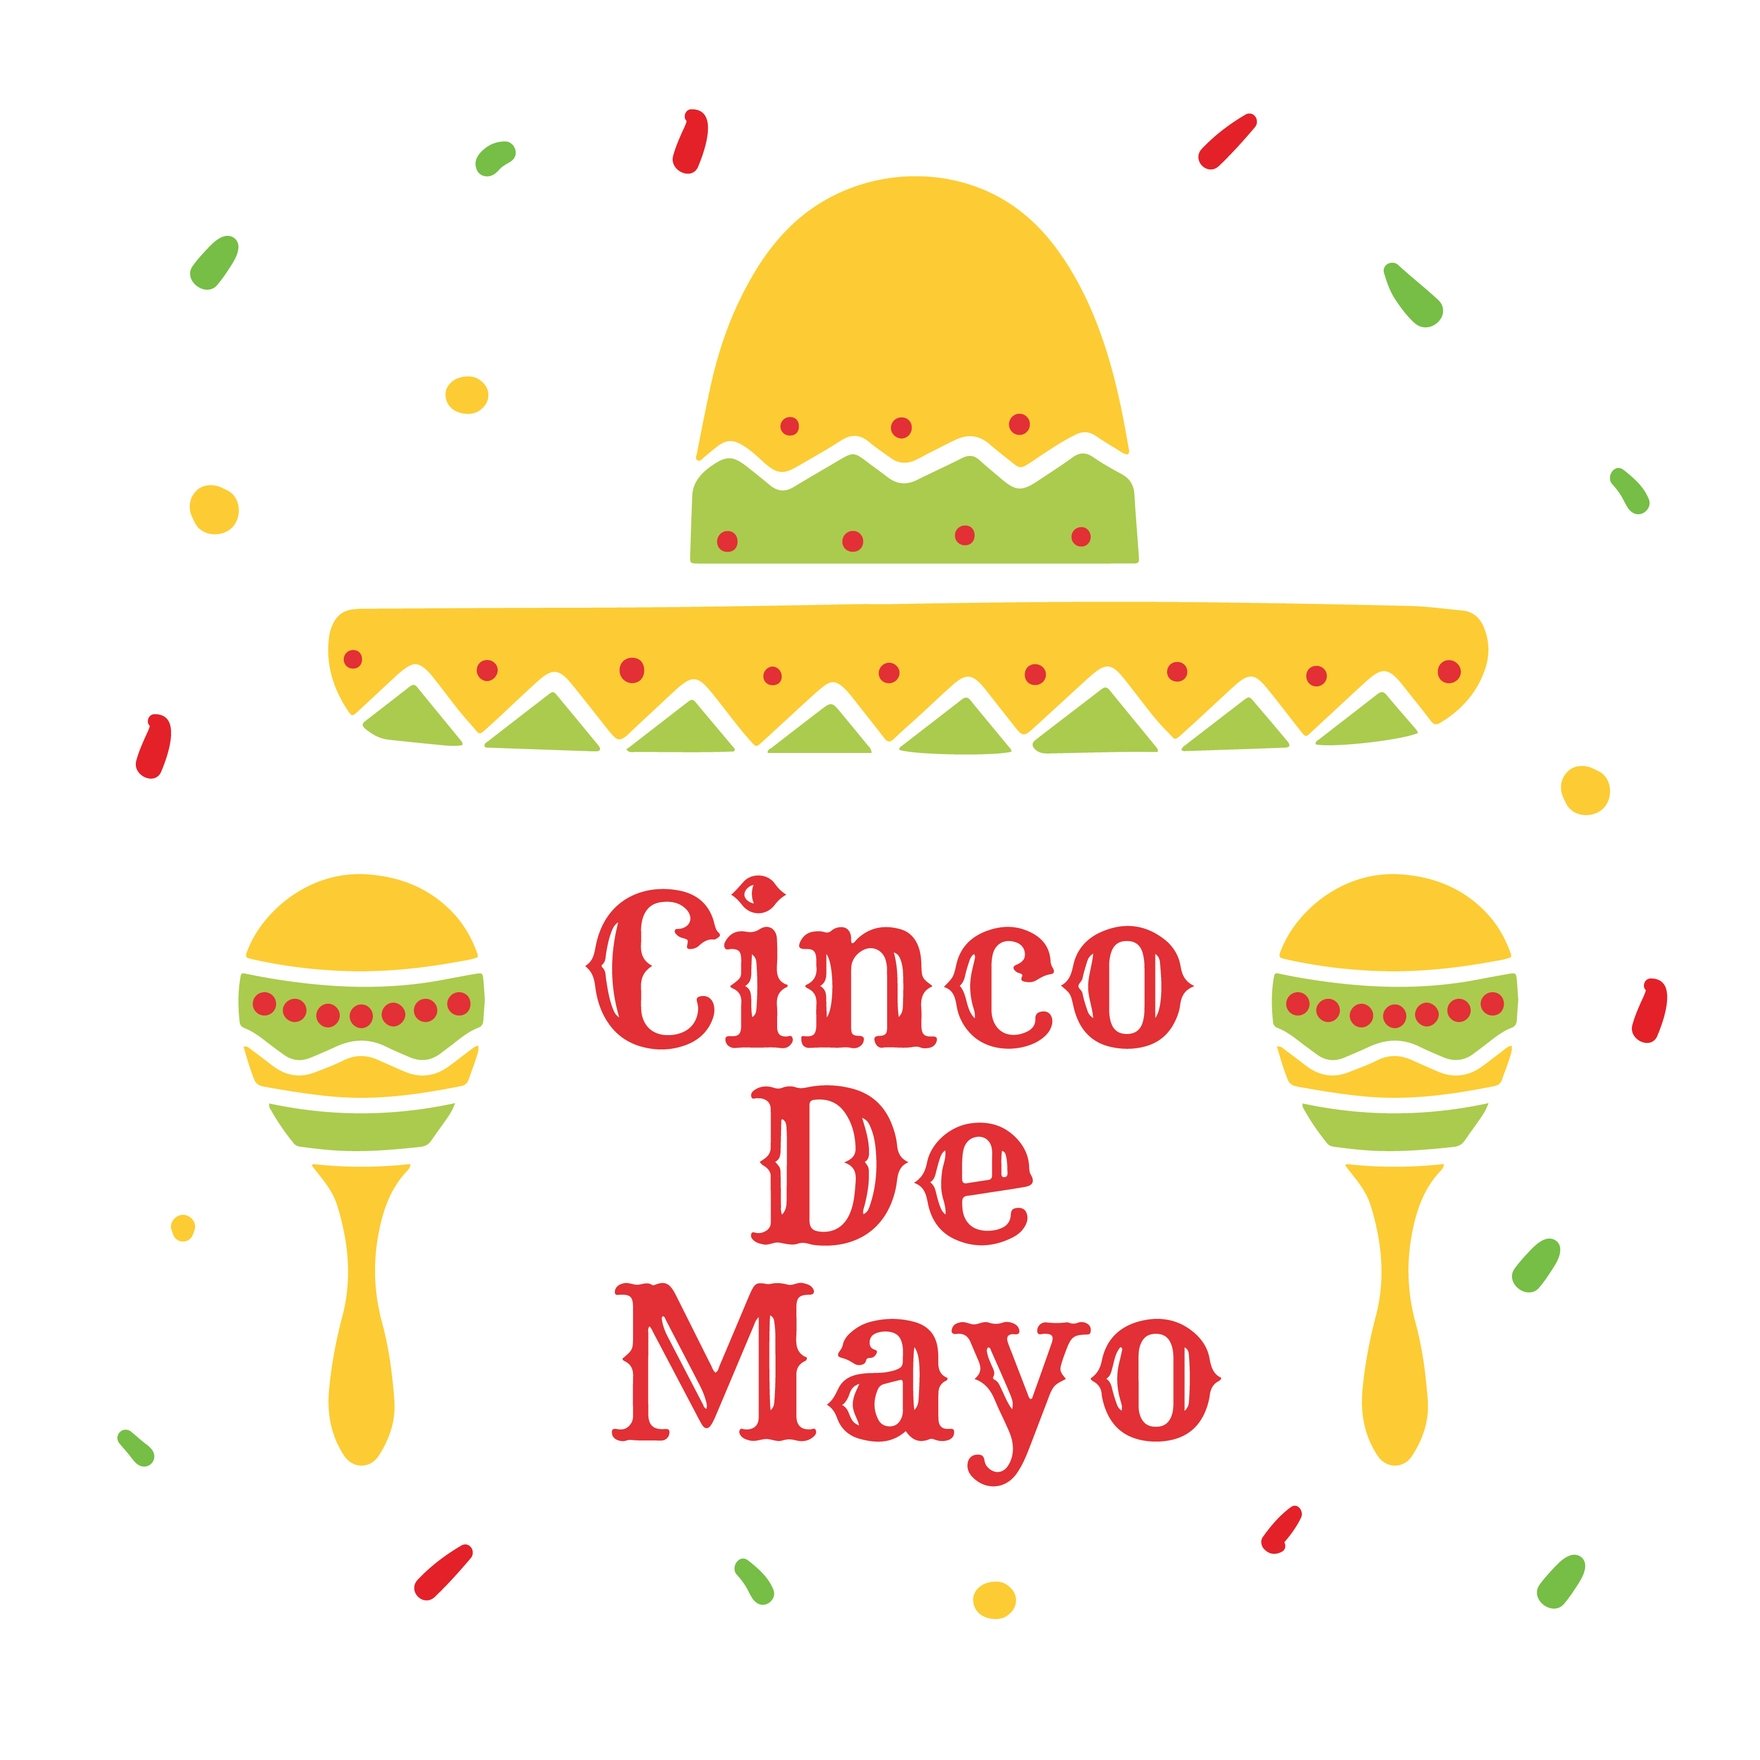 Cinco De Mayo Gif in Illustrator, EPS, SVG, JPG, GIF, PNG, After Effects